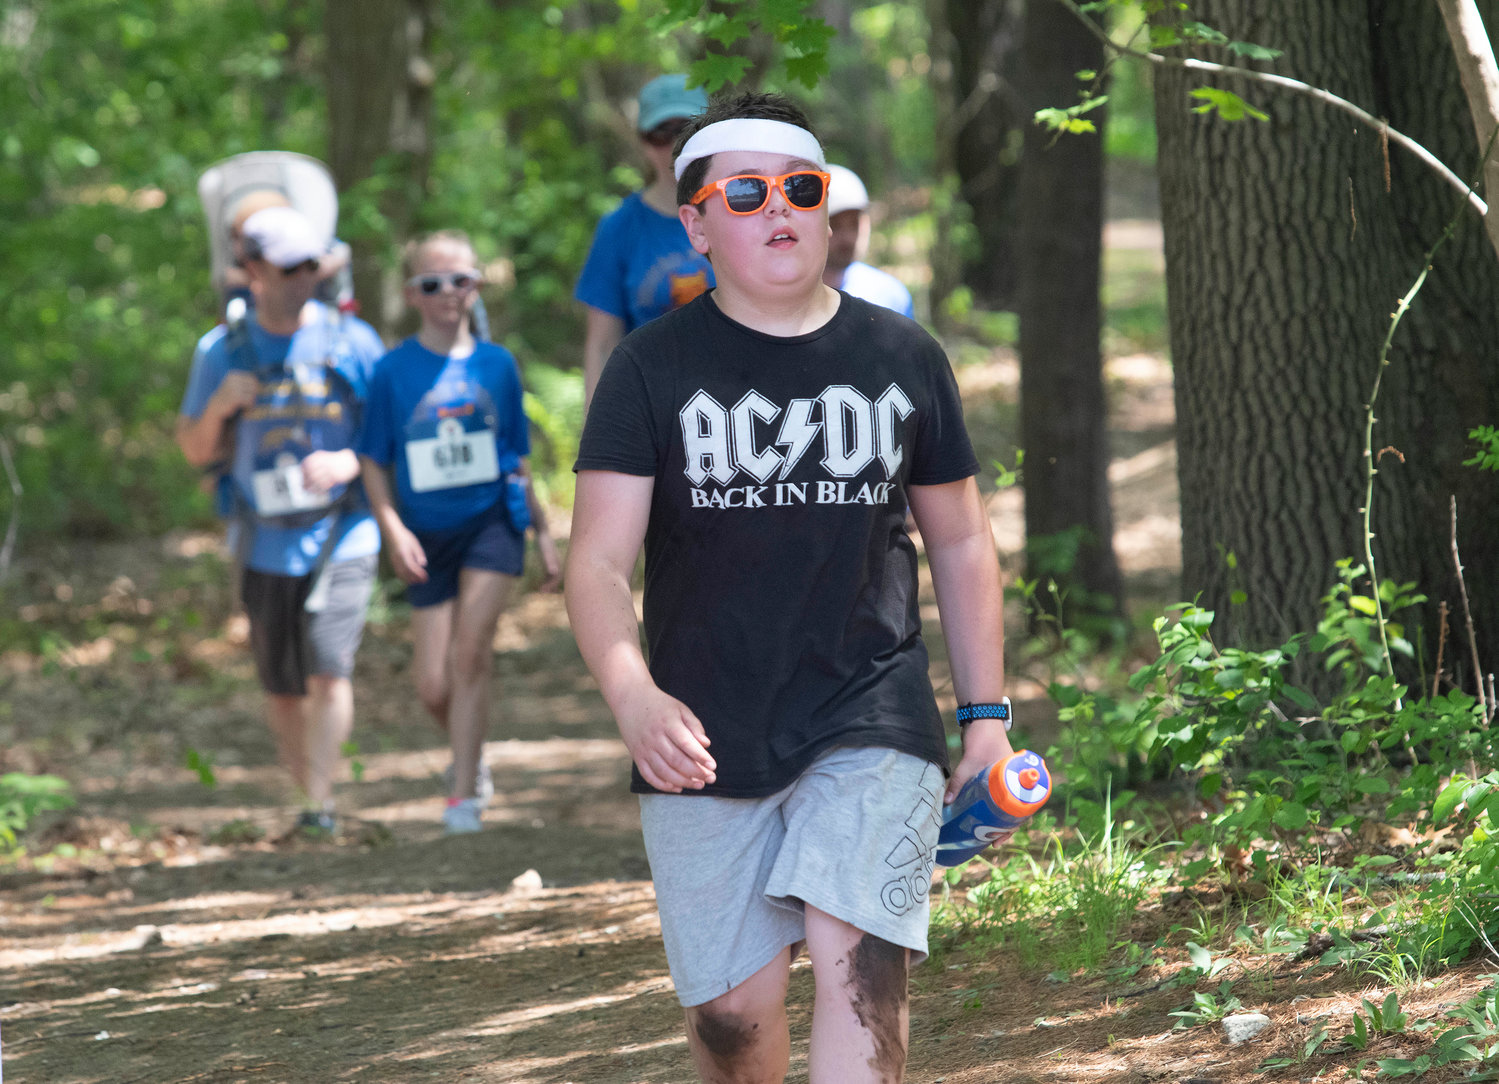 Hundreds of competitors — young and old — participated in the local adventure race.